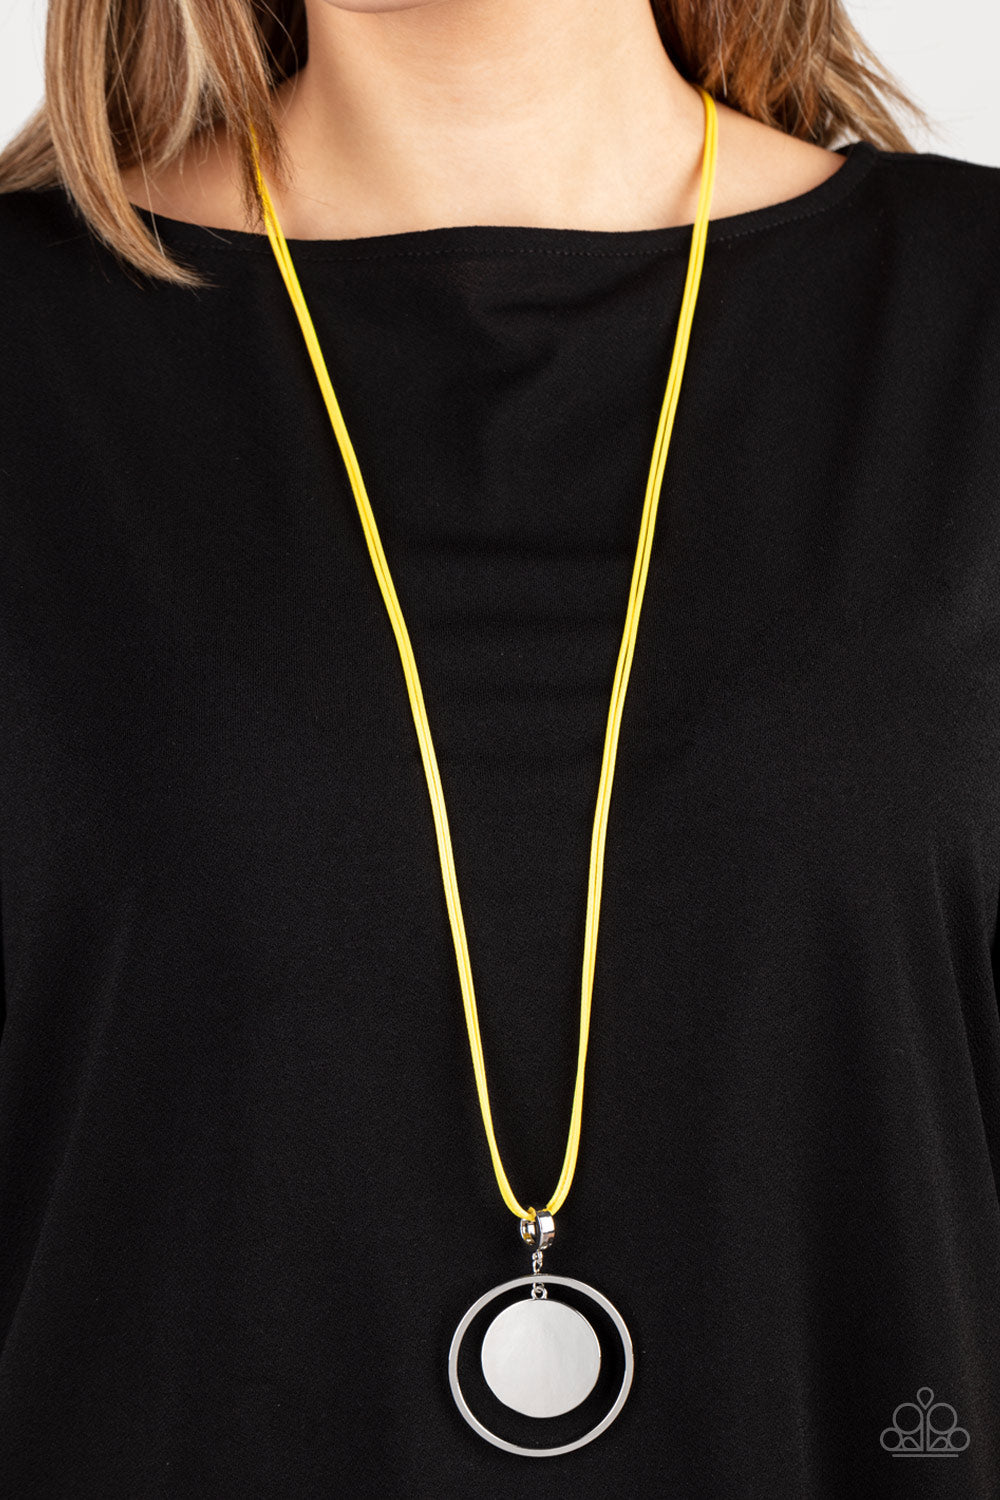 Paparazzi - Rural Reflection - Yellow Necklace